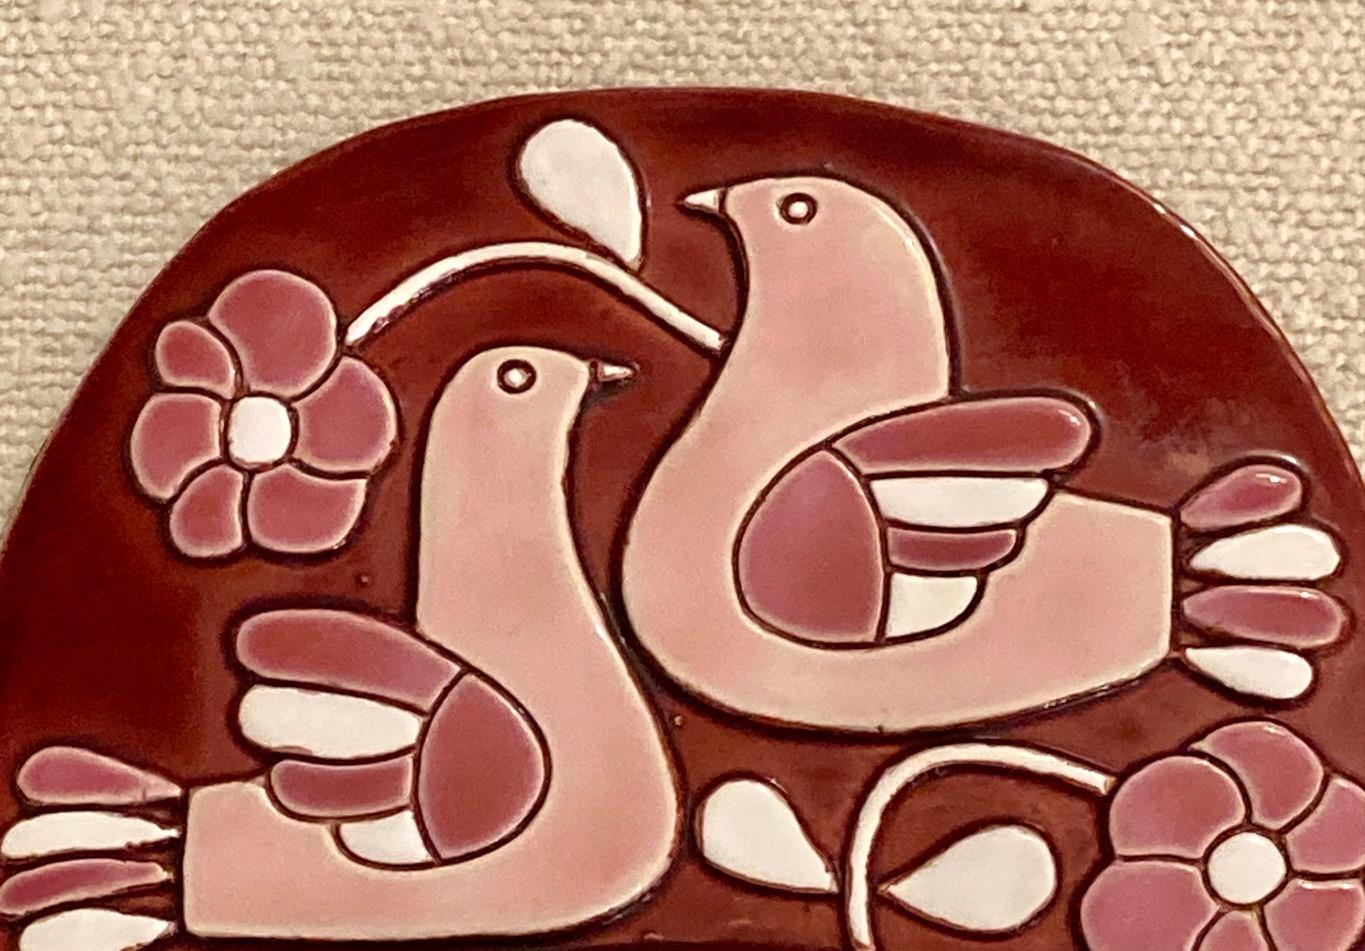 A ceramic wall mirror, 2 doves facing each other surrounded by flowers
Embossed earthenware enameled in 3 shades of pink and white
Original green felt at the back, in very good condition.
Mithé Espelt (born 1923)
Lunel, south of France,
circa